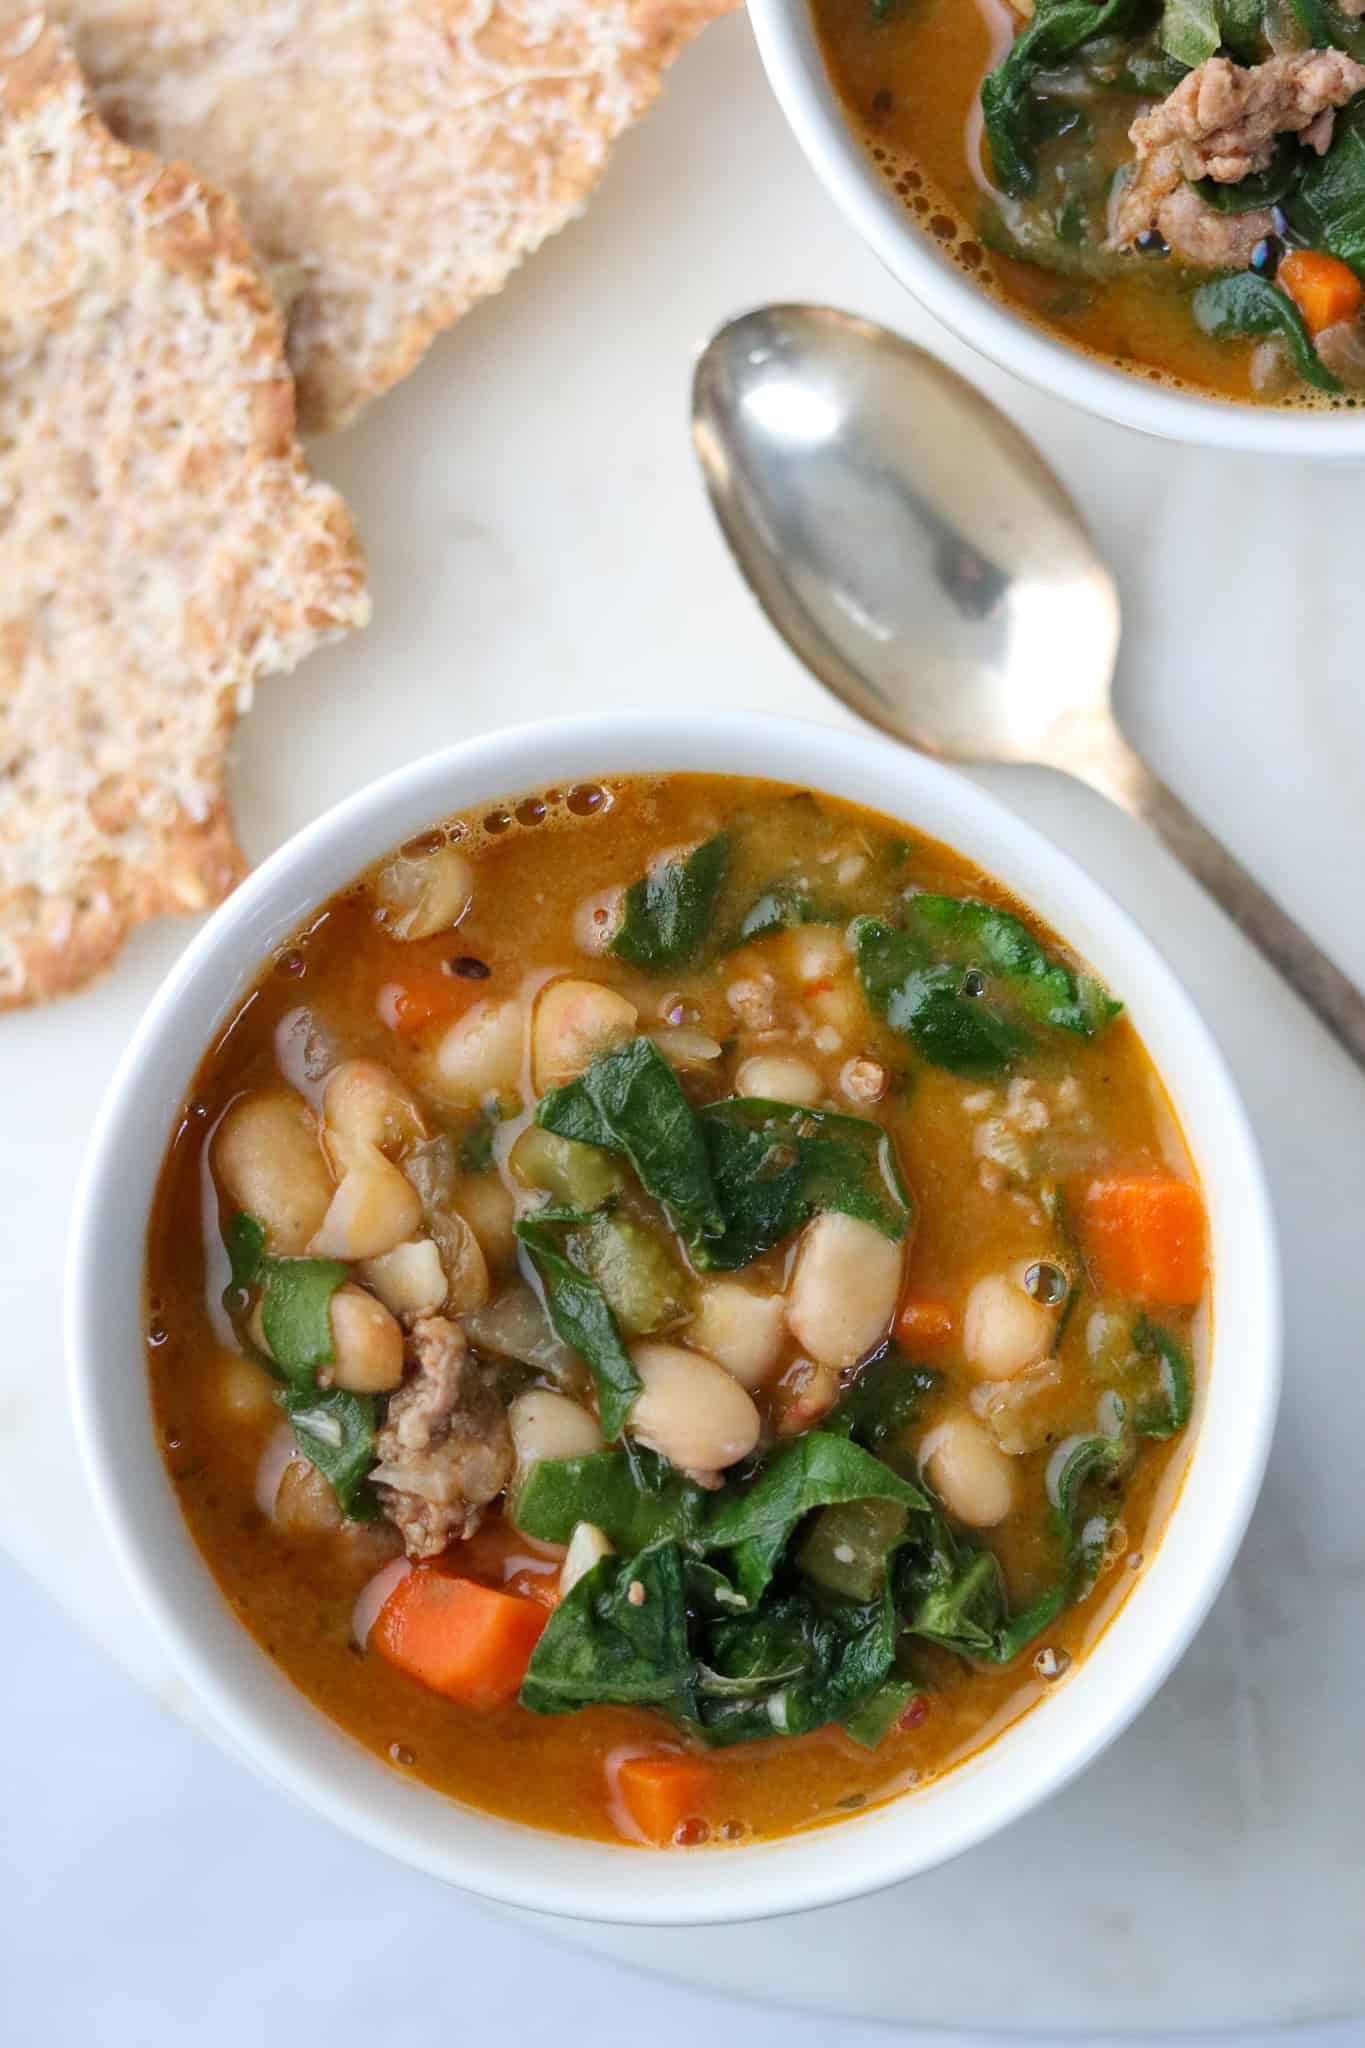 Herbed White Bean and Sausage Soup with Swiss Chard | True North Kitchen